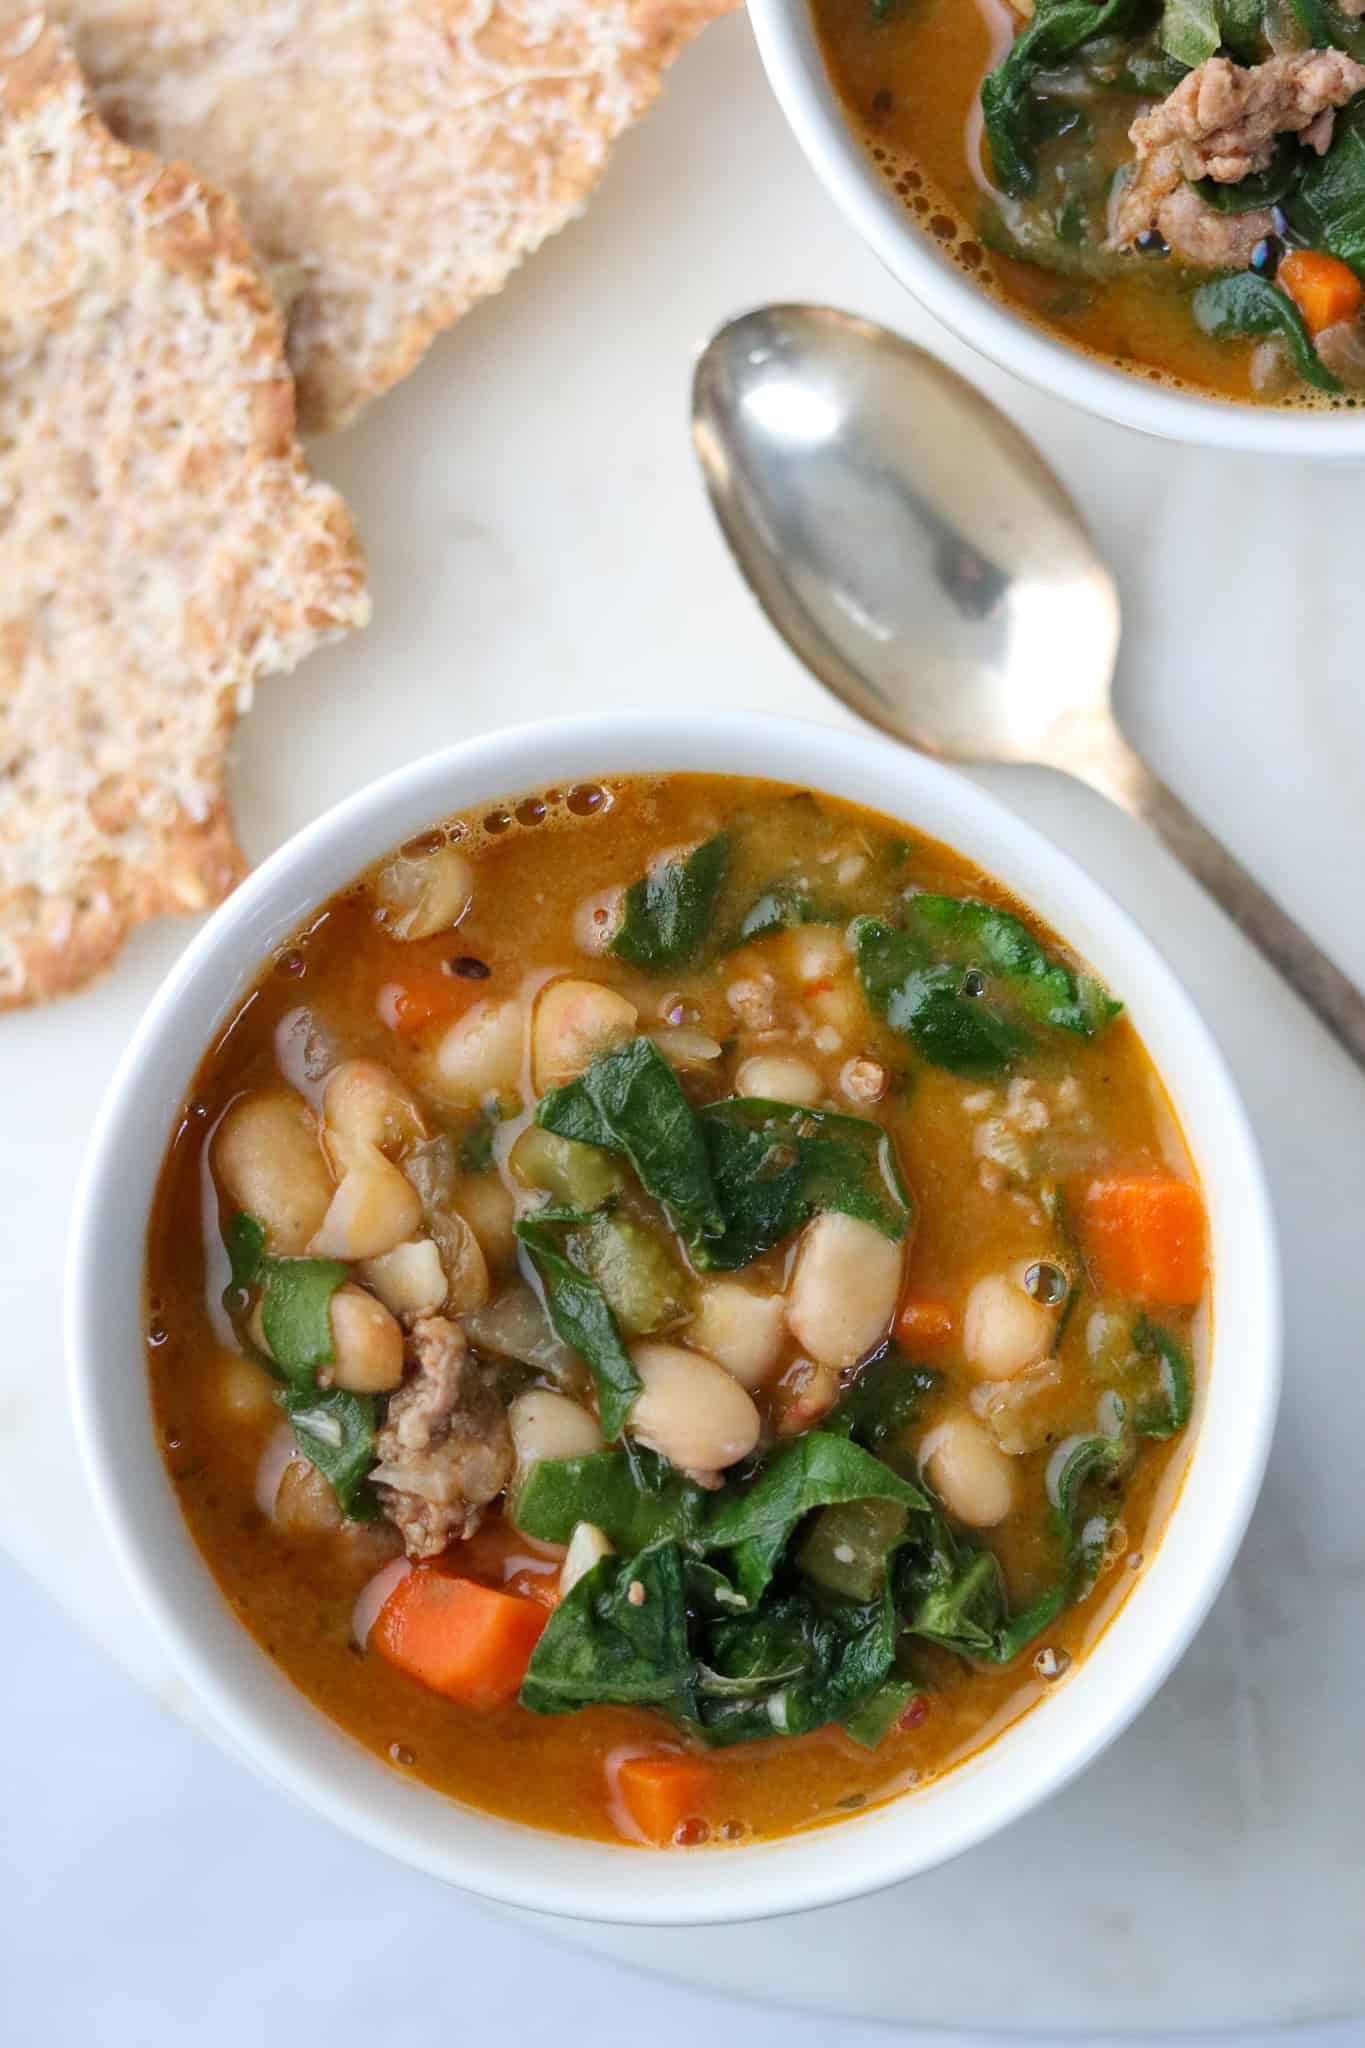 Herbed White Bean and Sausage Soup with Swiss Chard | True North Kitchen